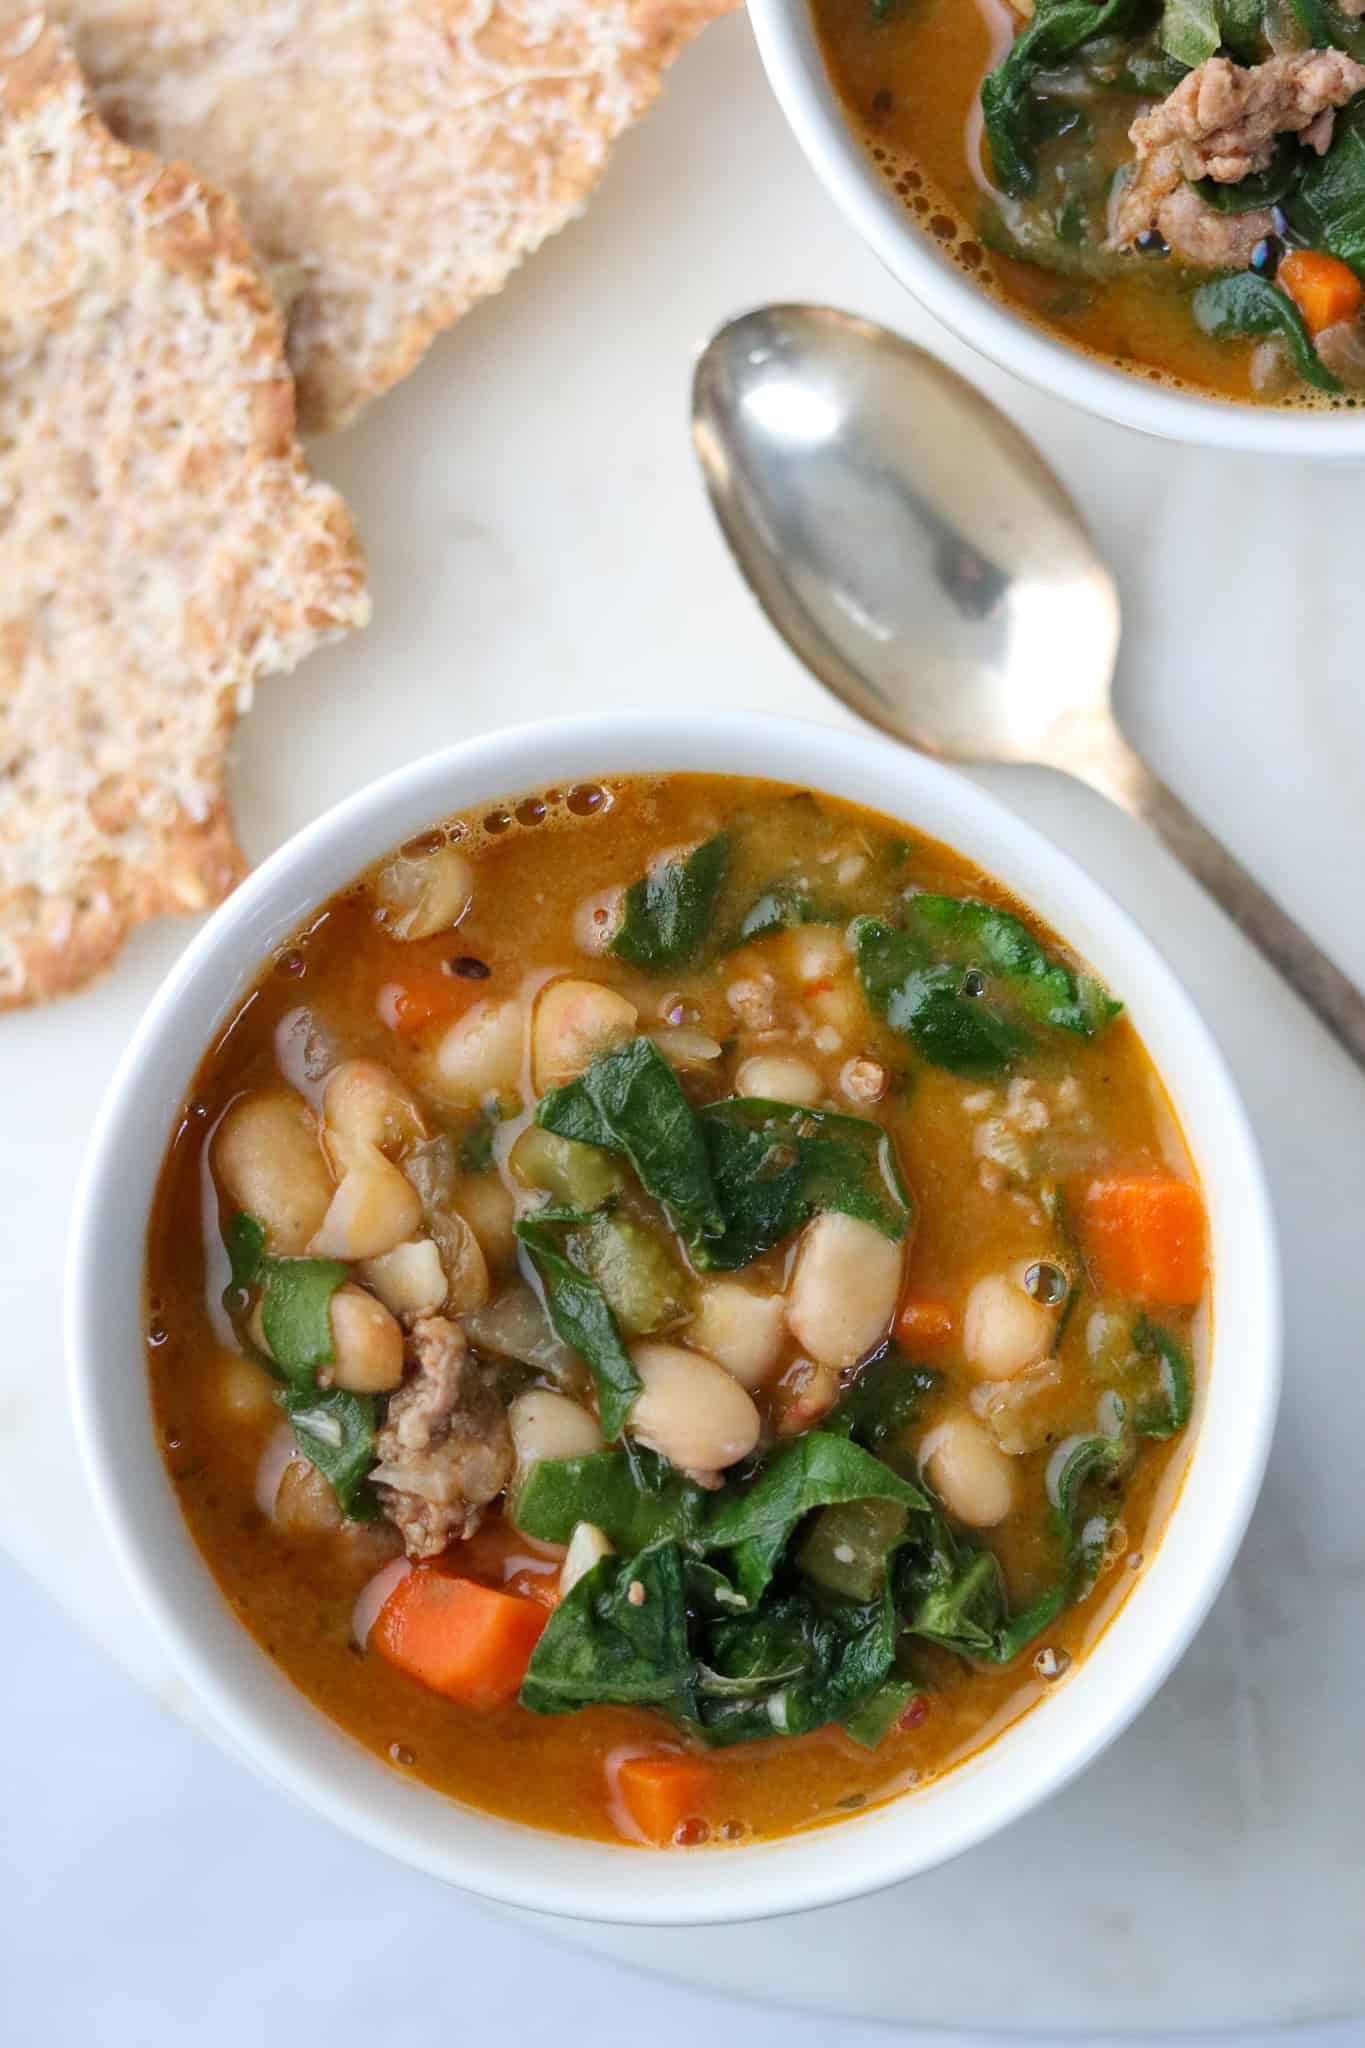 Herbed White Bean and Sausage Soup with Swiss Chard | True North Kitchen